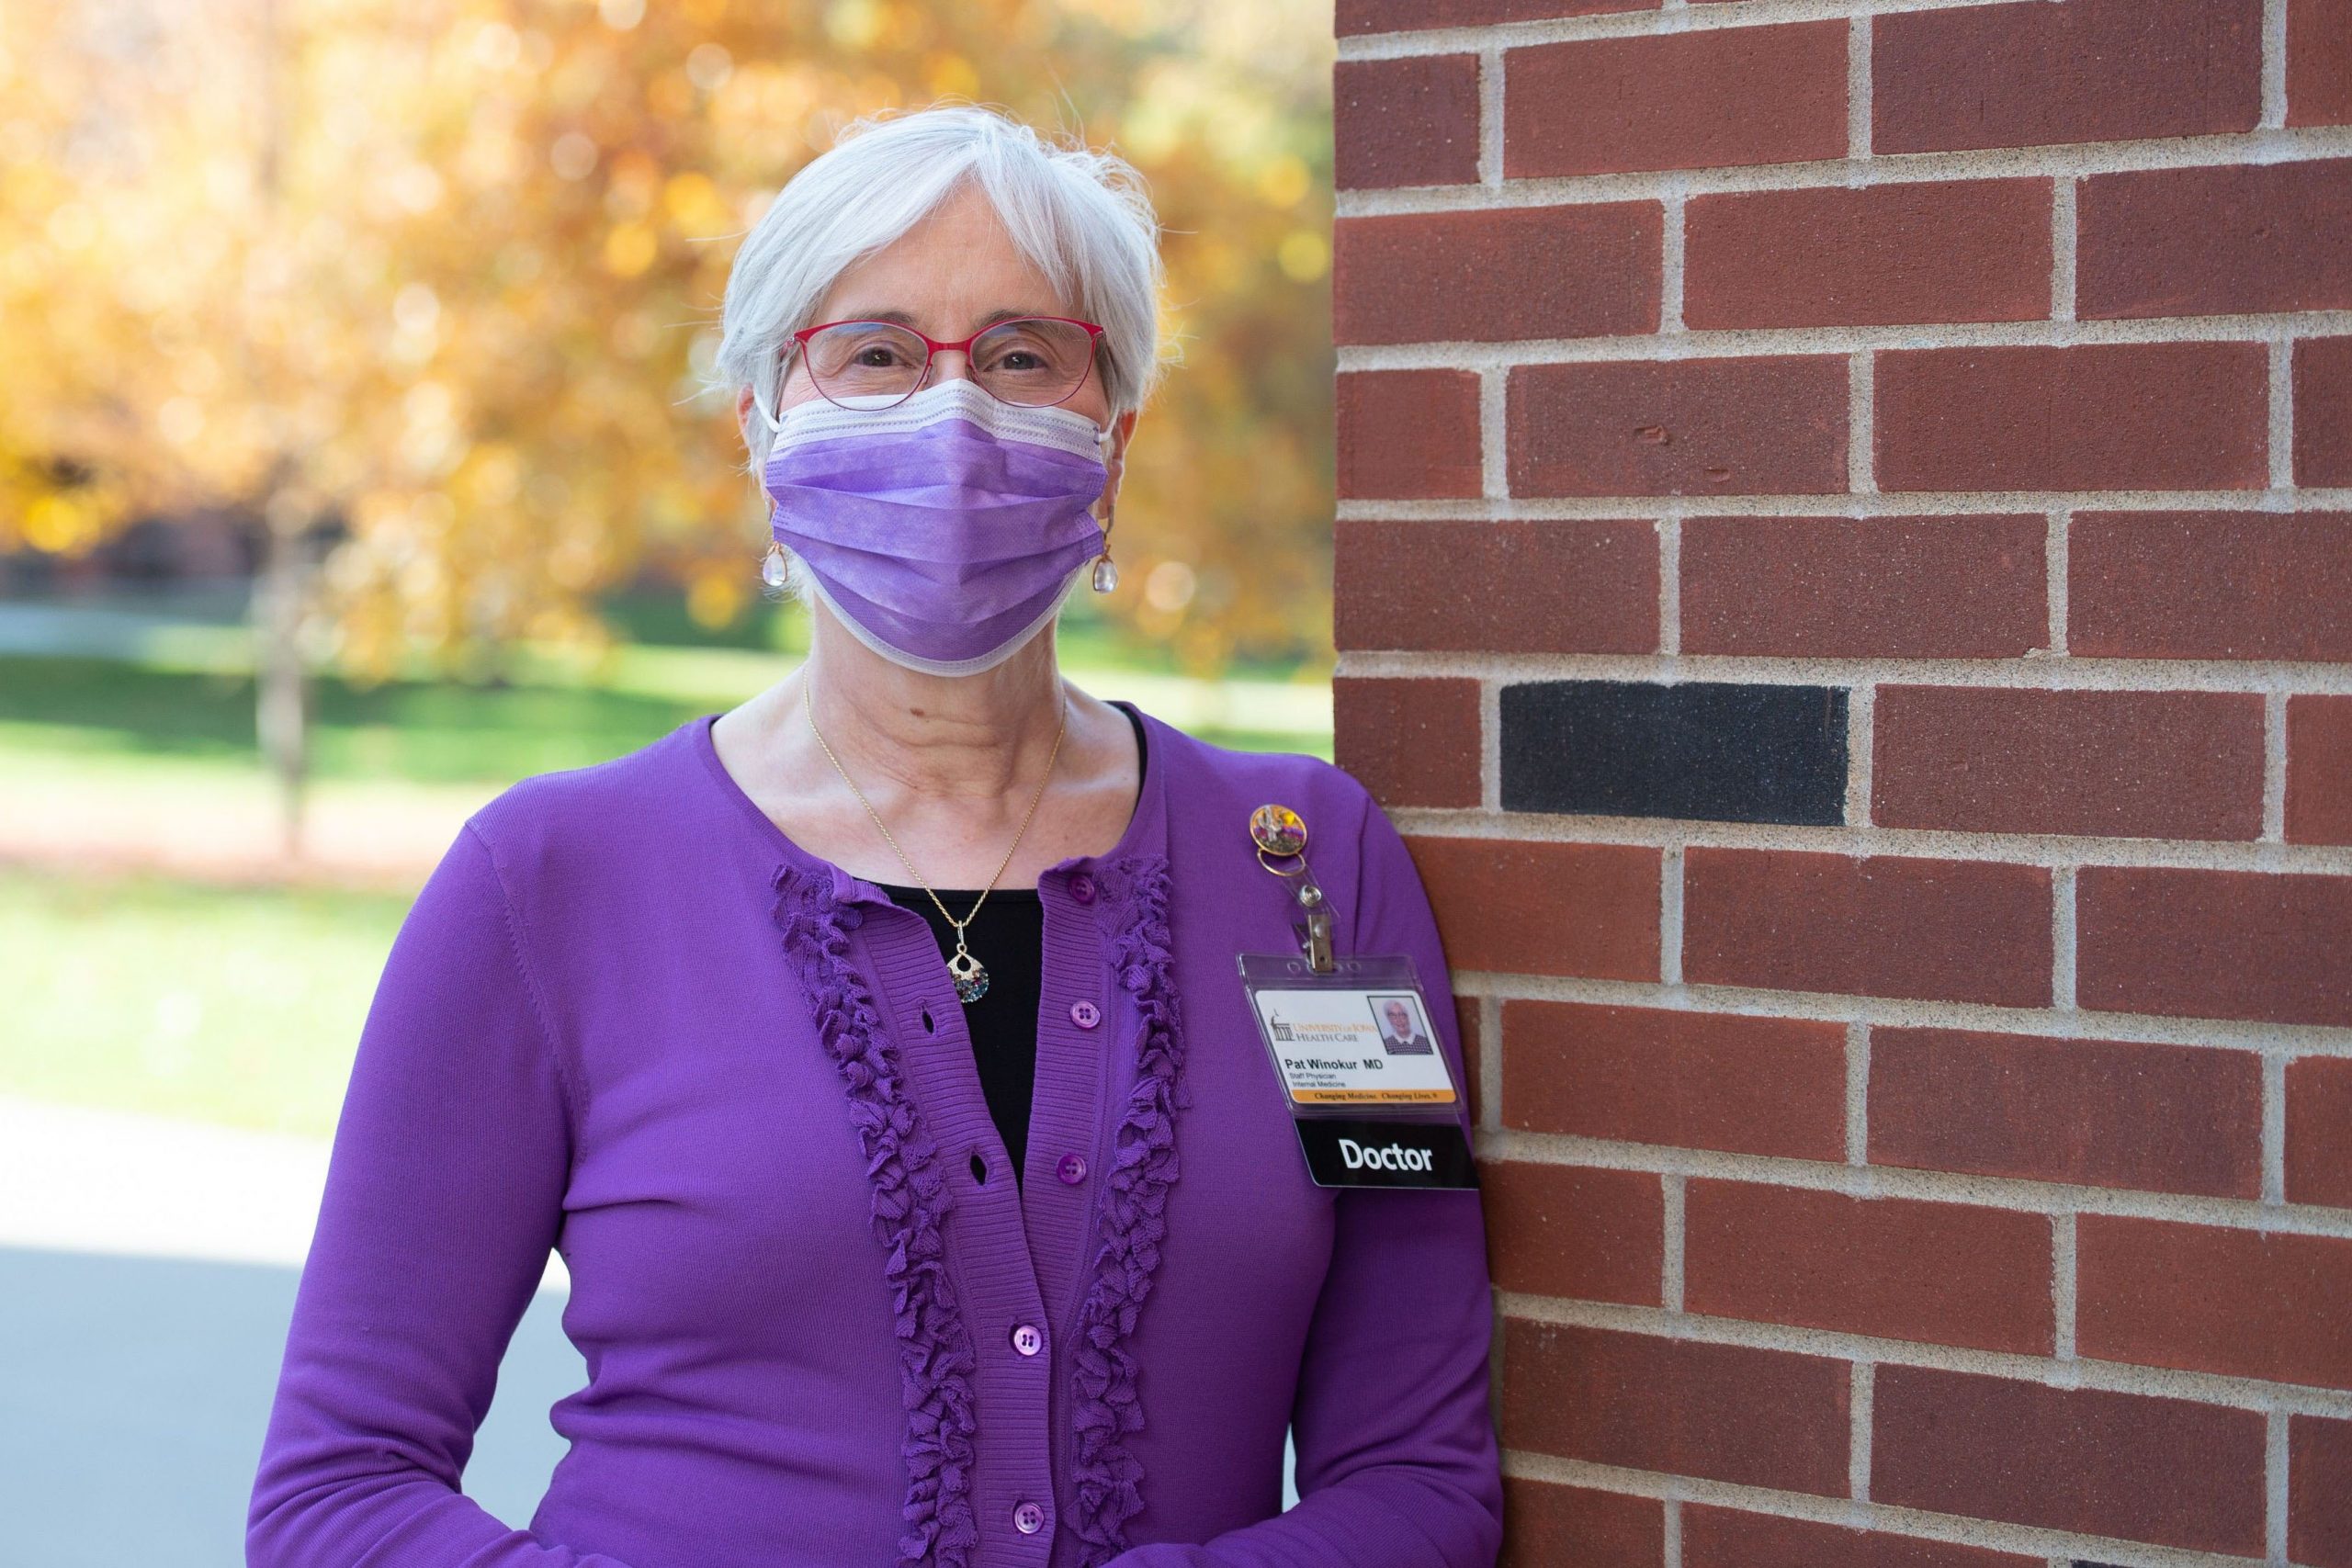 Pat Winokur, MD, executive dean of the University of Iowa Carver College of Medicine, standing outdoors, wearing face mask